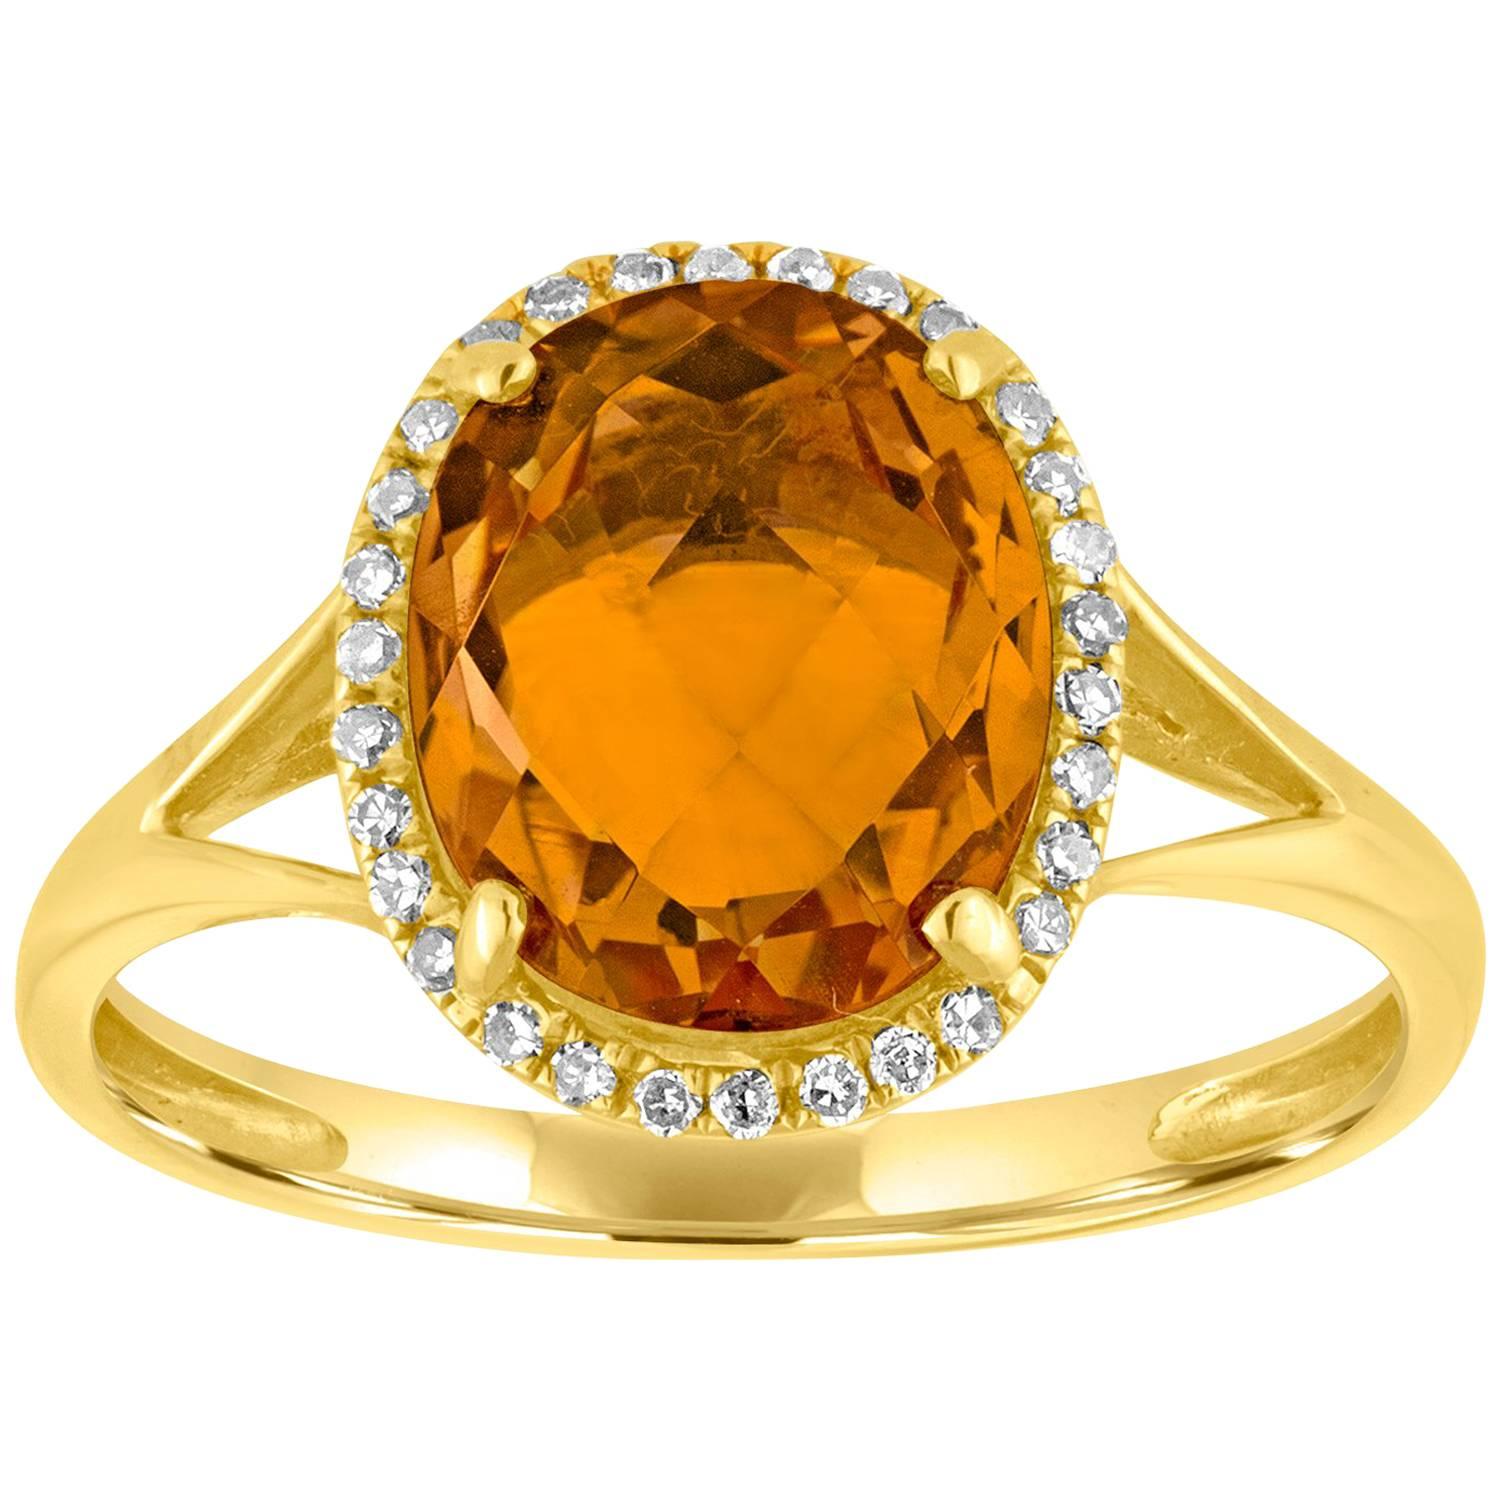 Oval Cut 2.47 Carats Citrine and Diamond Halo Gold Ring